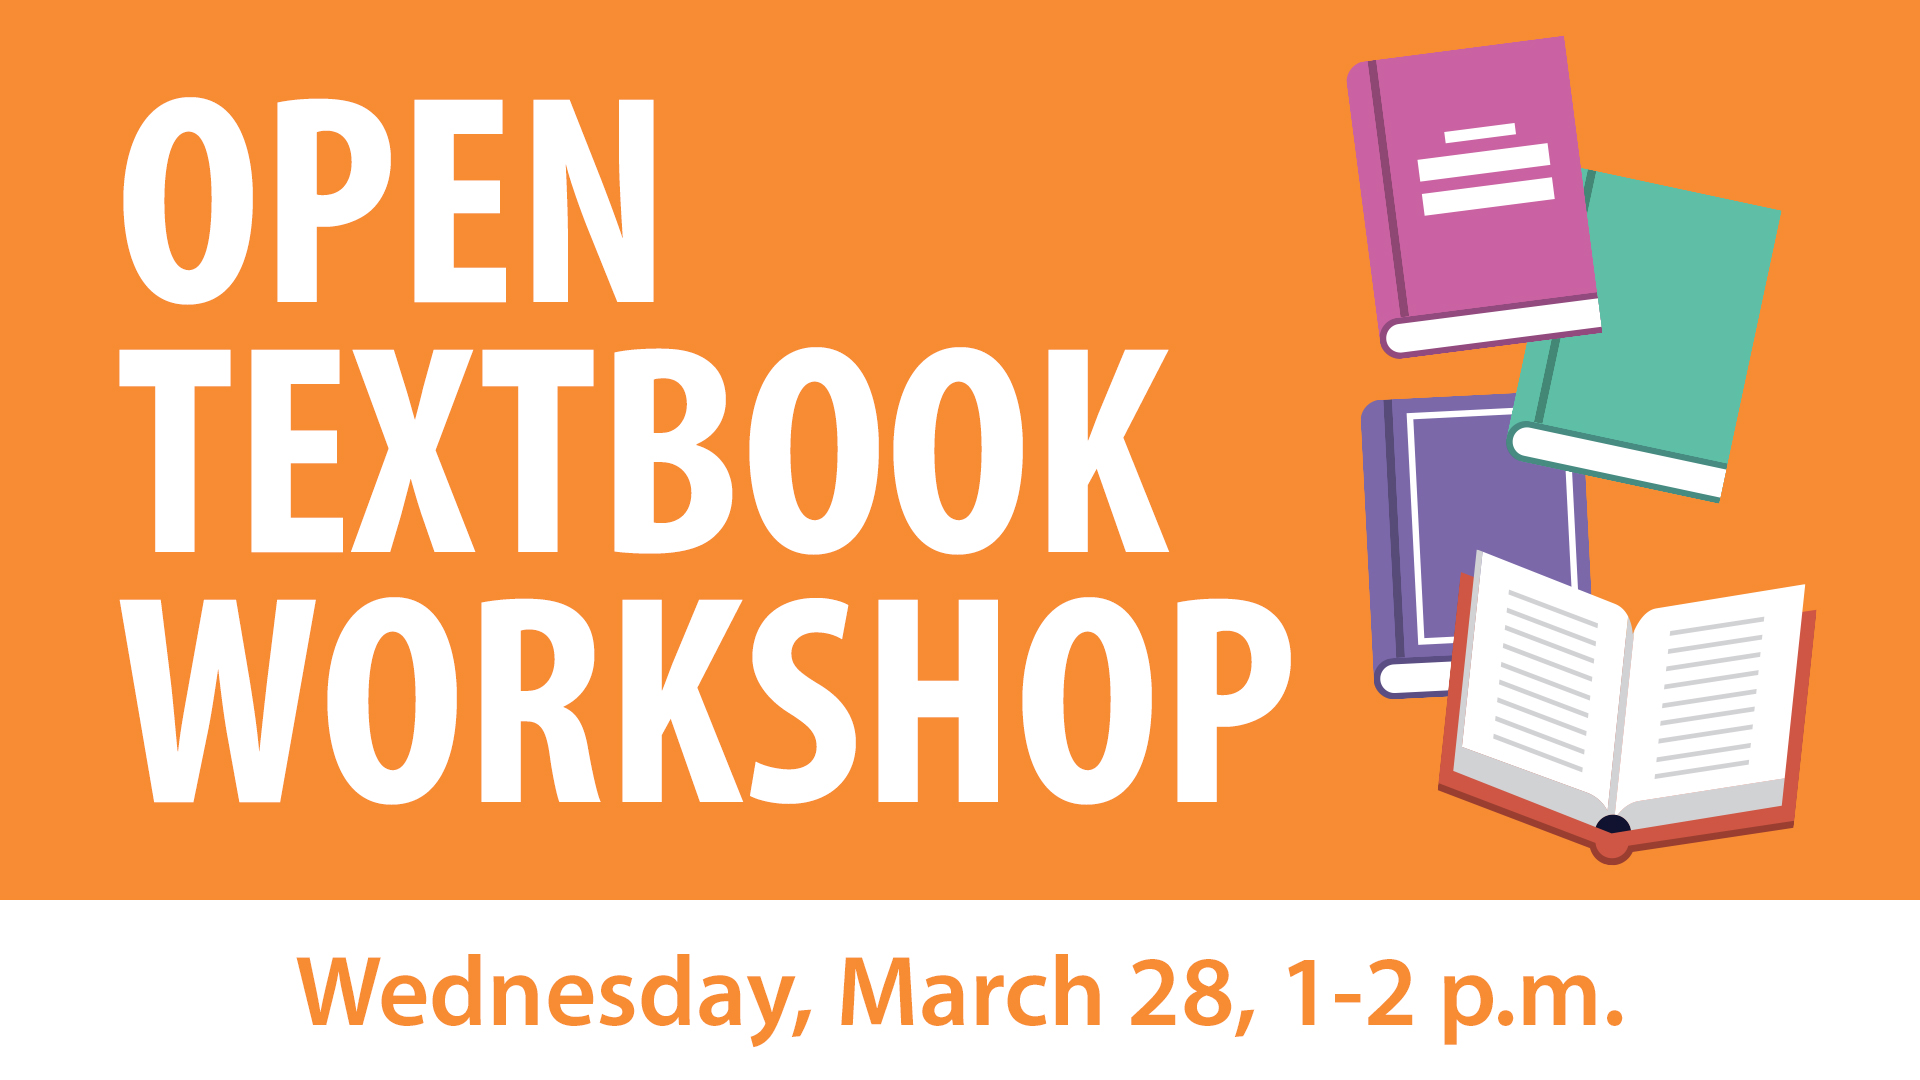 Open Textbook Workshop, Wednesday, March 28, 1-2 p.m.